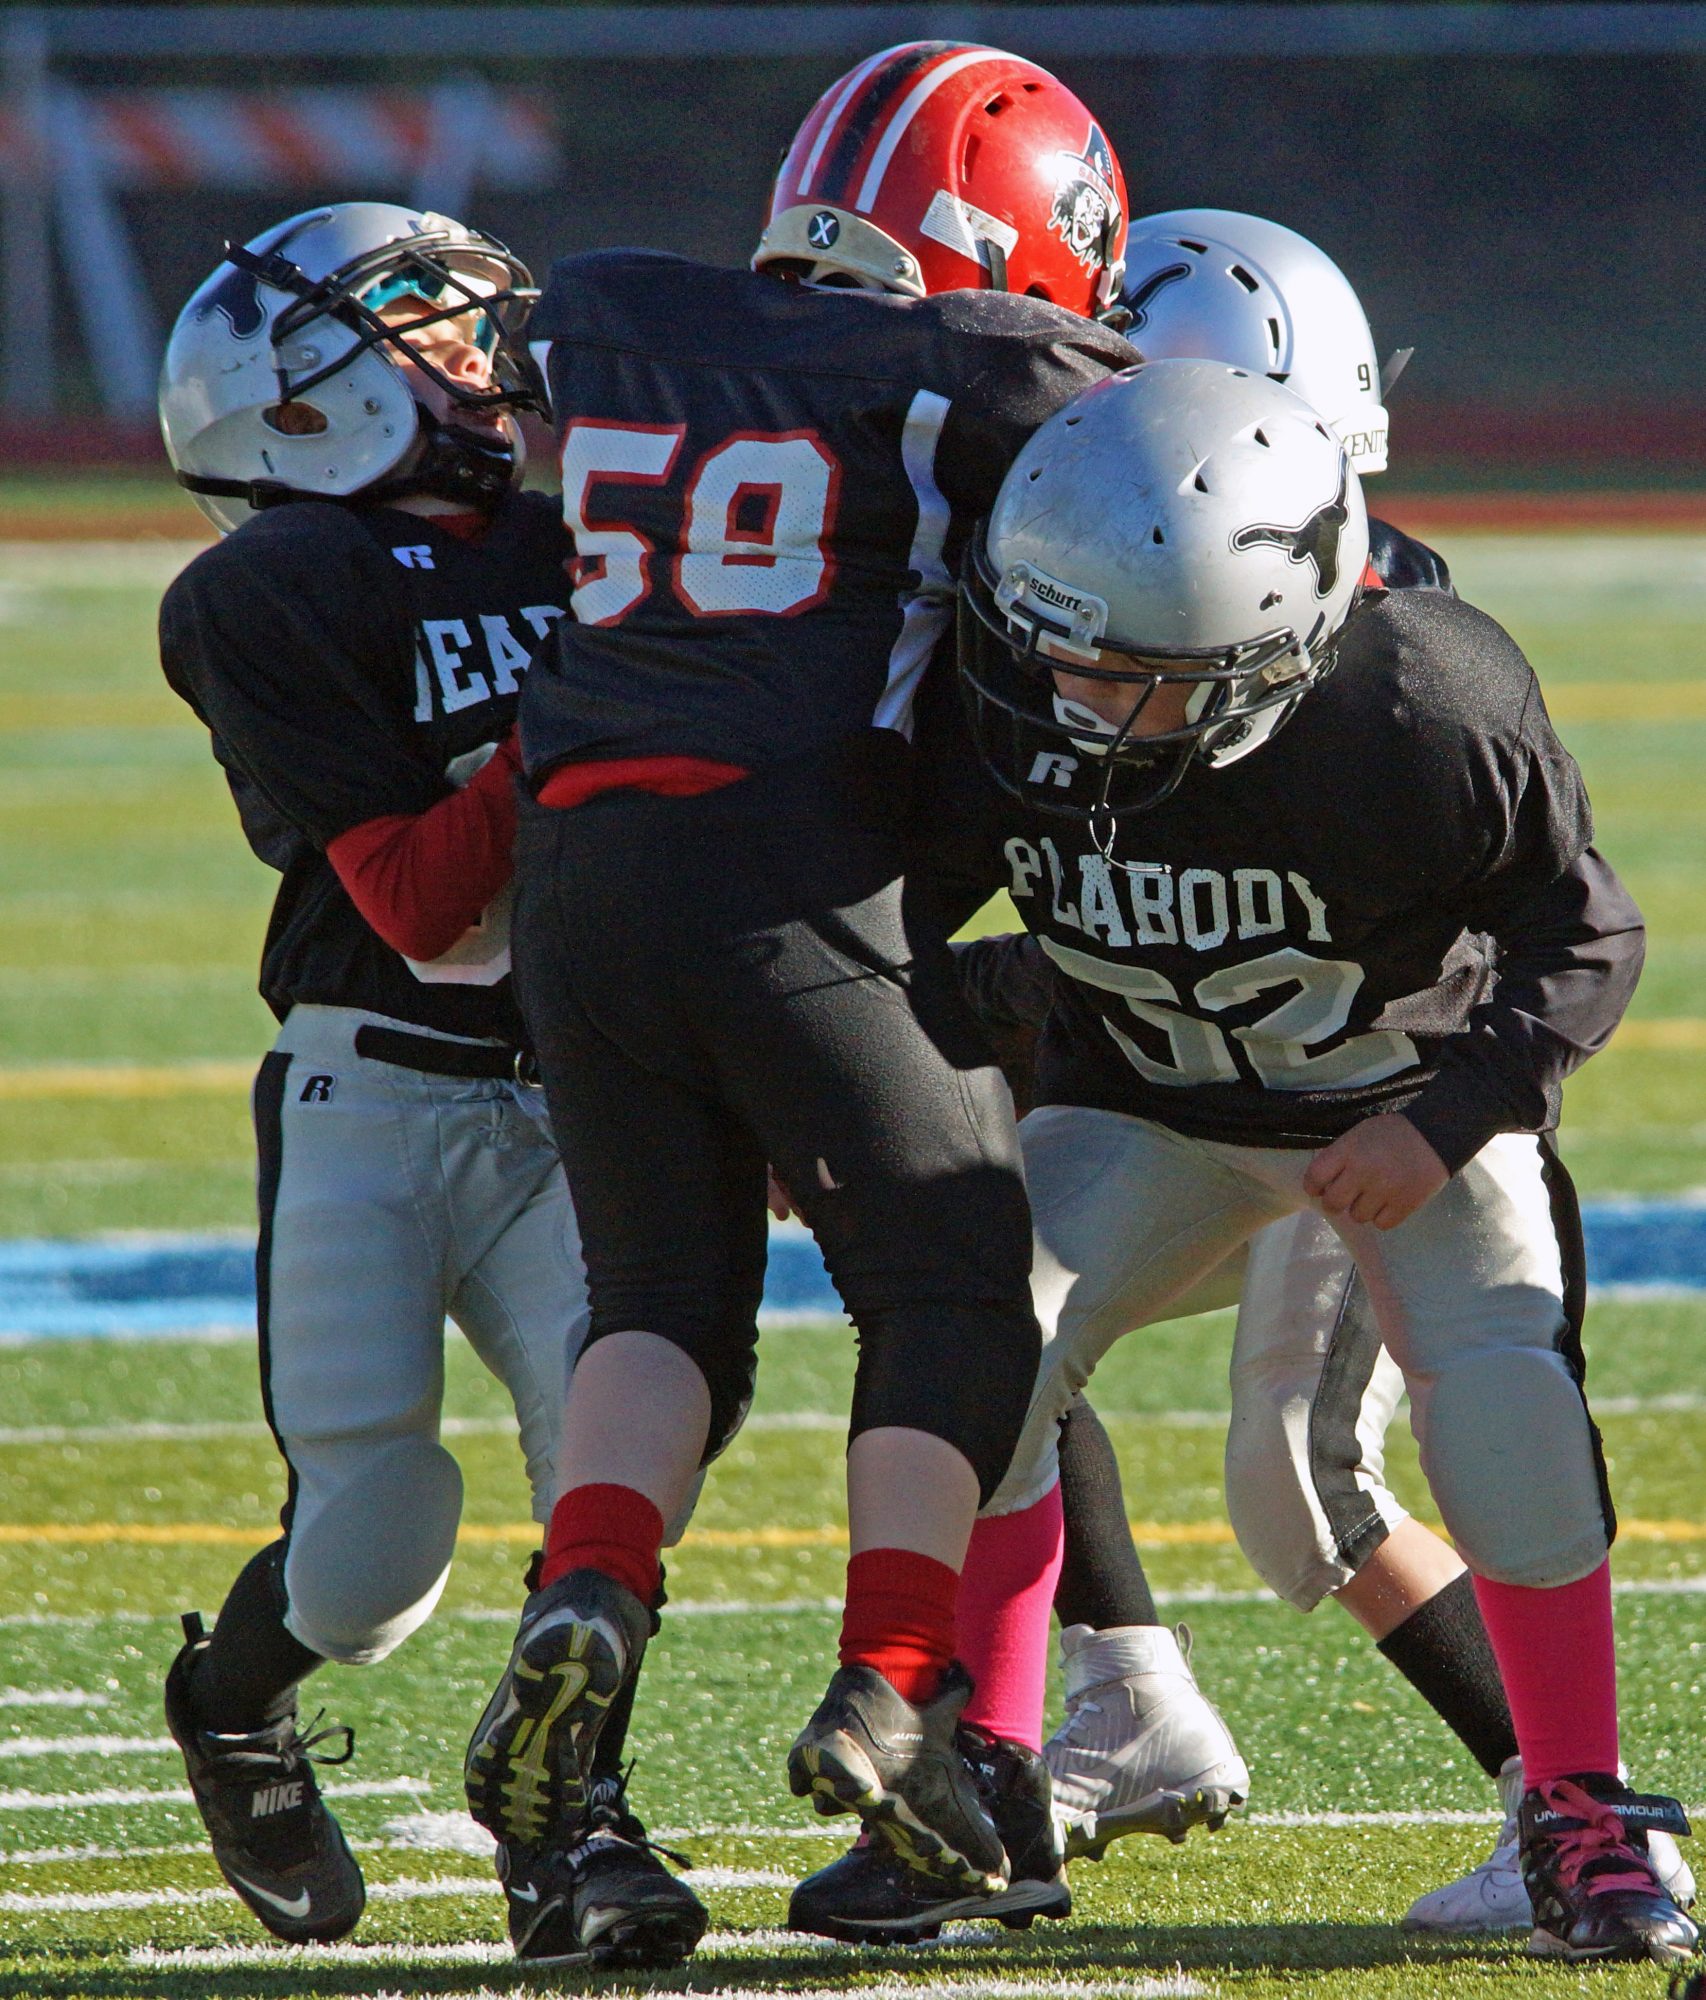 Peabody and Salem youth football players going head to head.